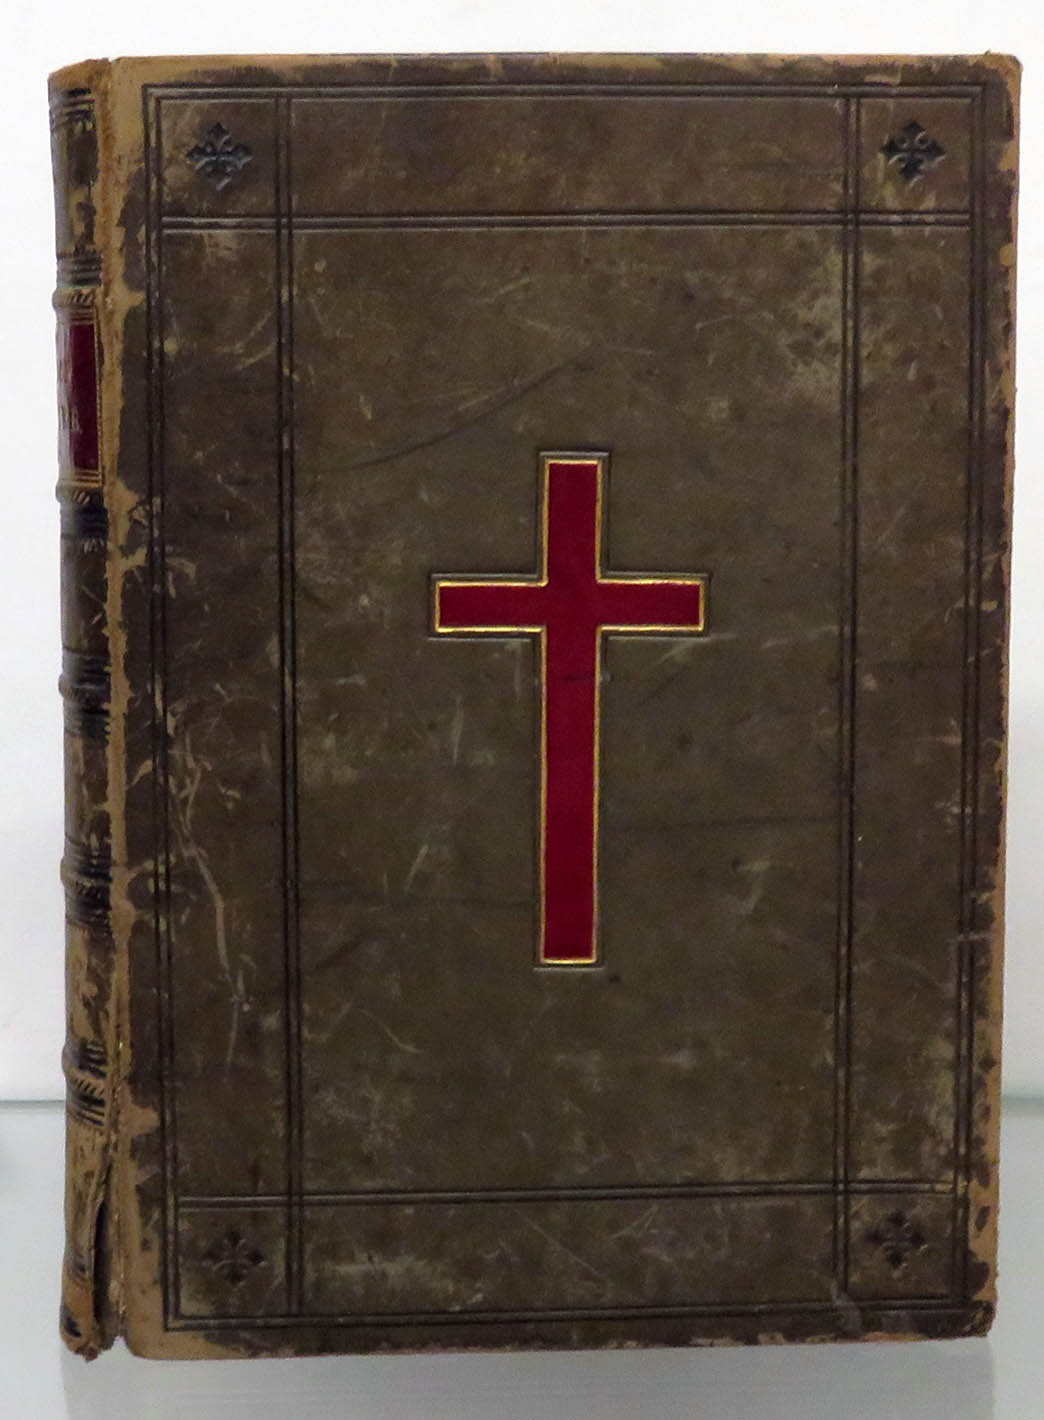 The Book Of Common Prayer And Administration Of The Sacraments, And Other Rites And Ceremonies Of The Church